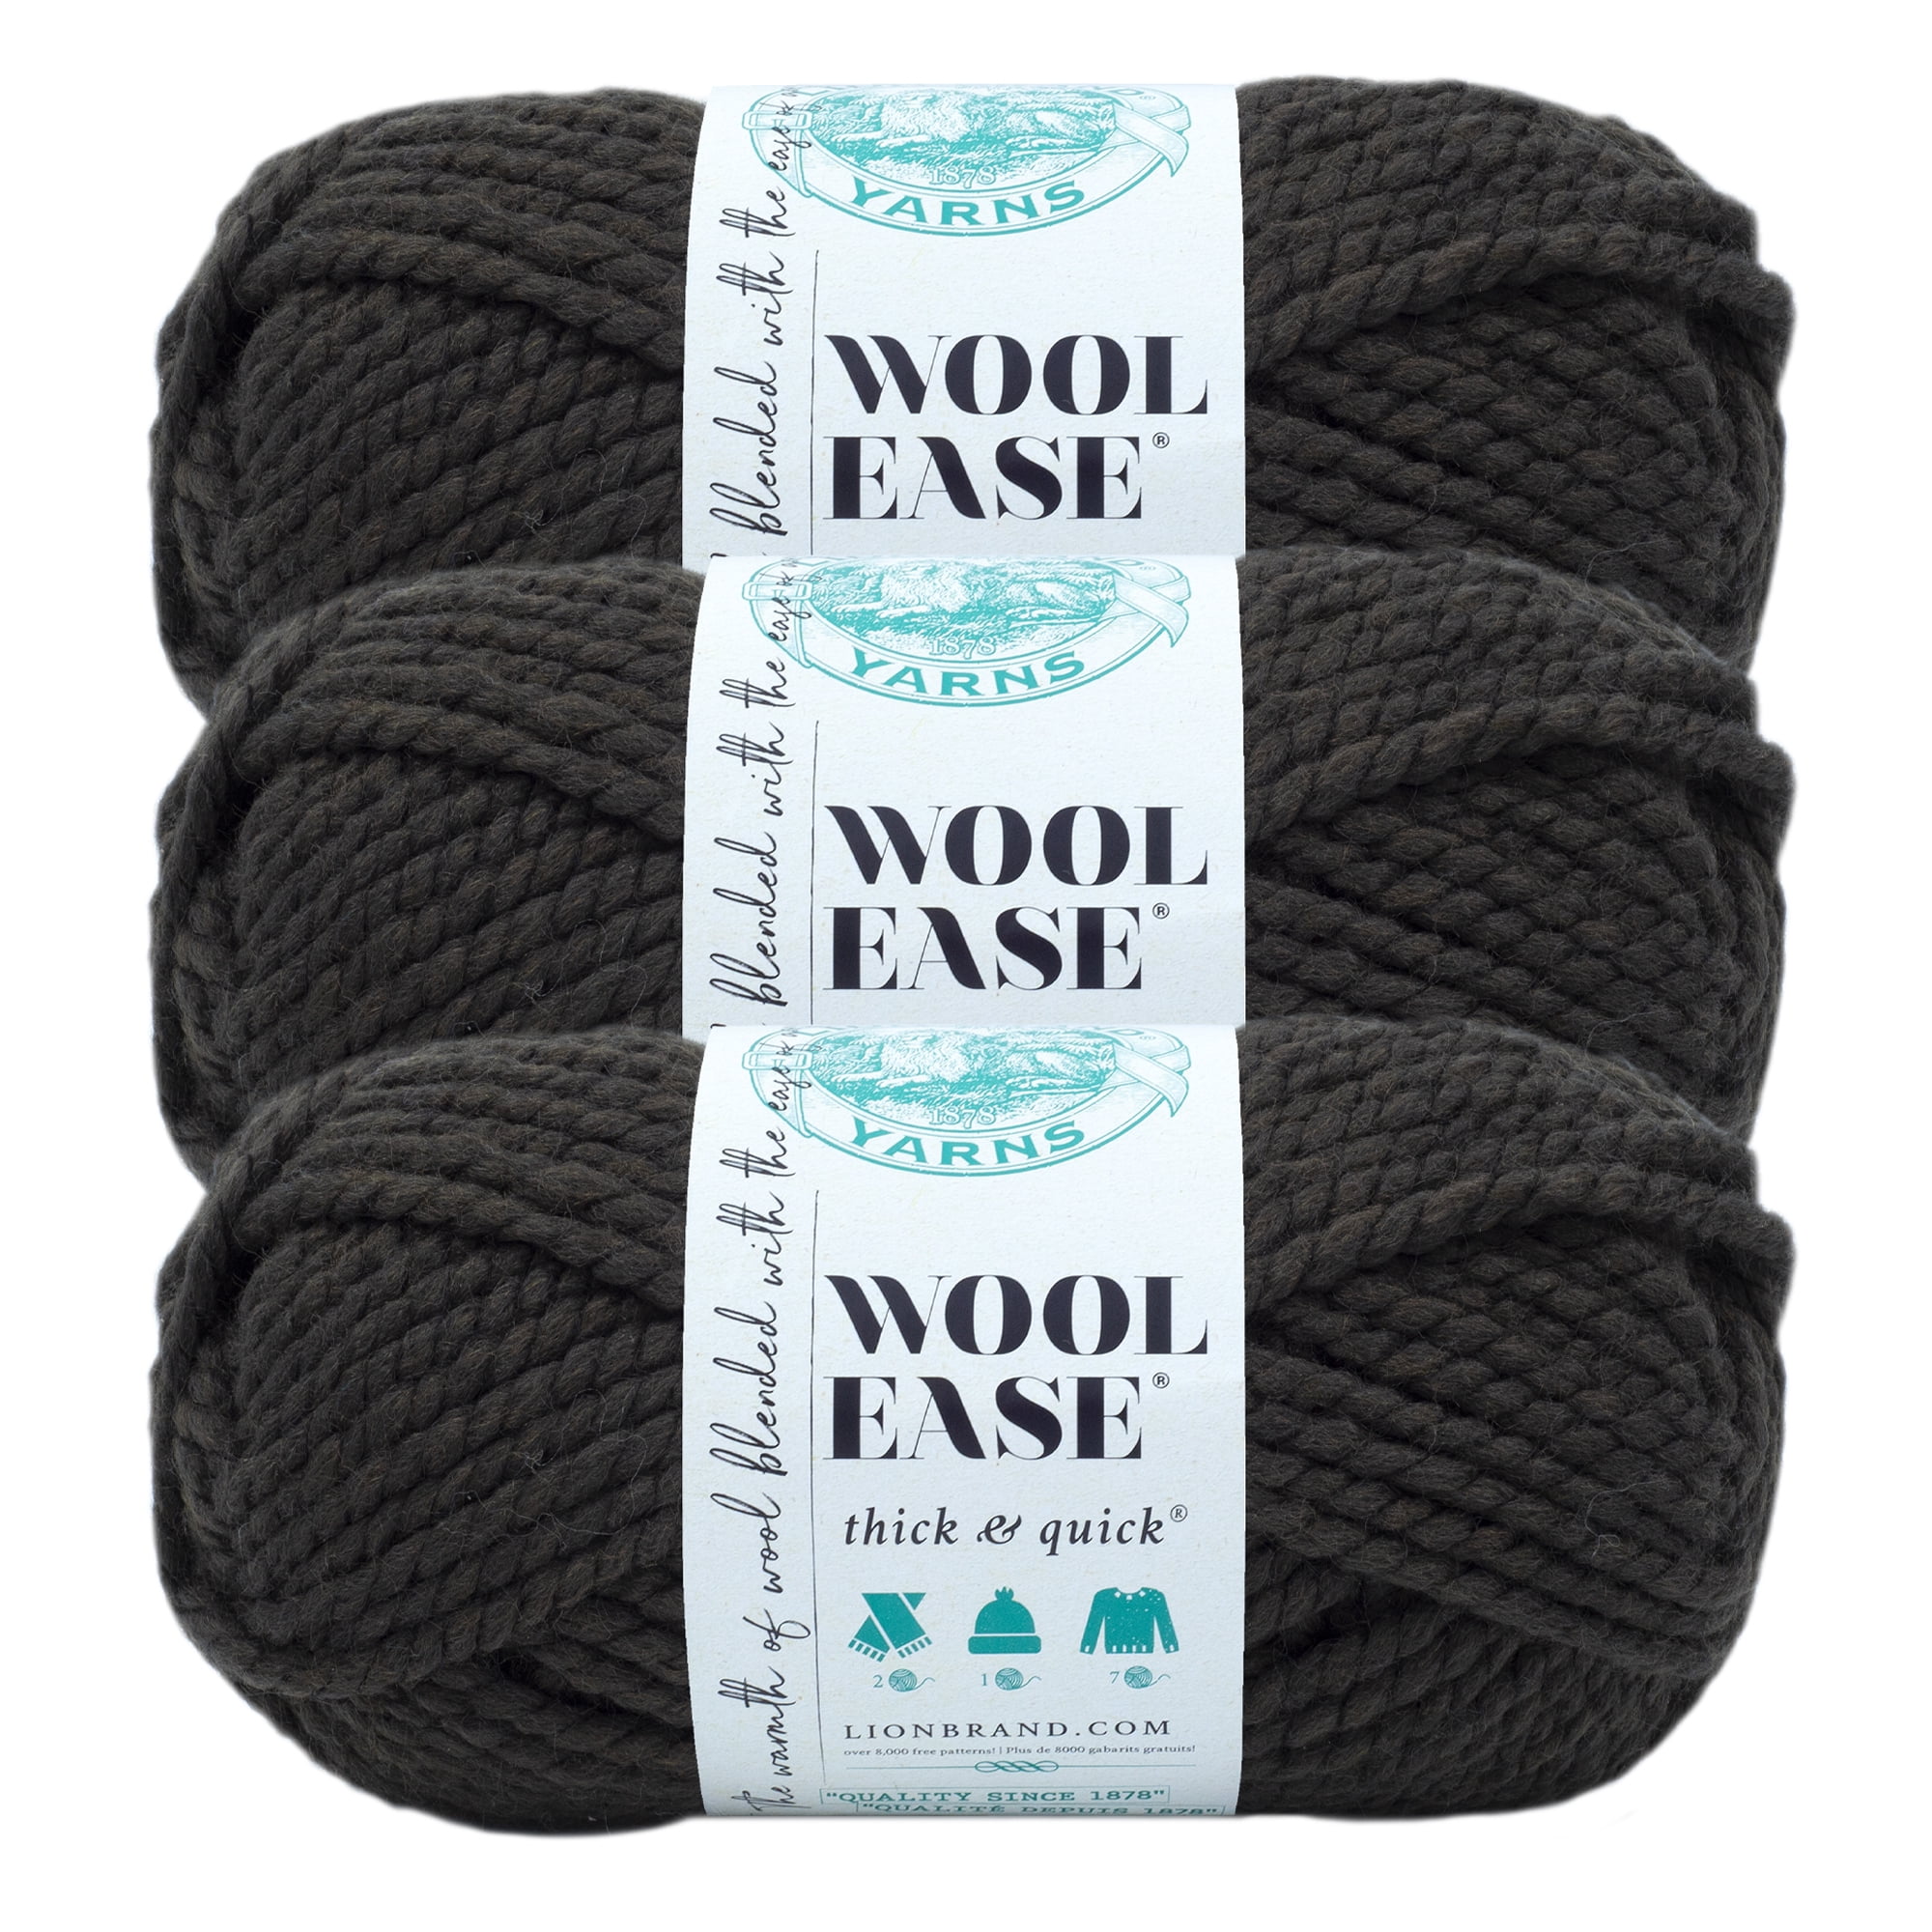 Lion Brand Yarn Wool-Ease Thick & Quick Black Walnut Super Bulky